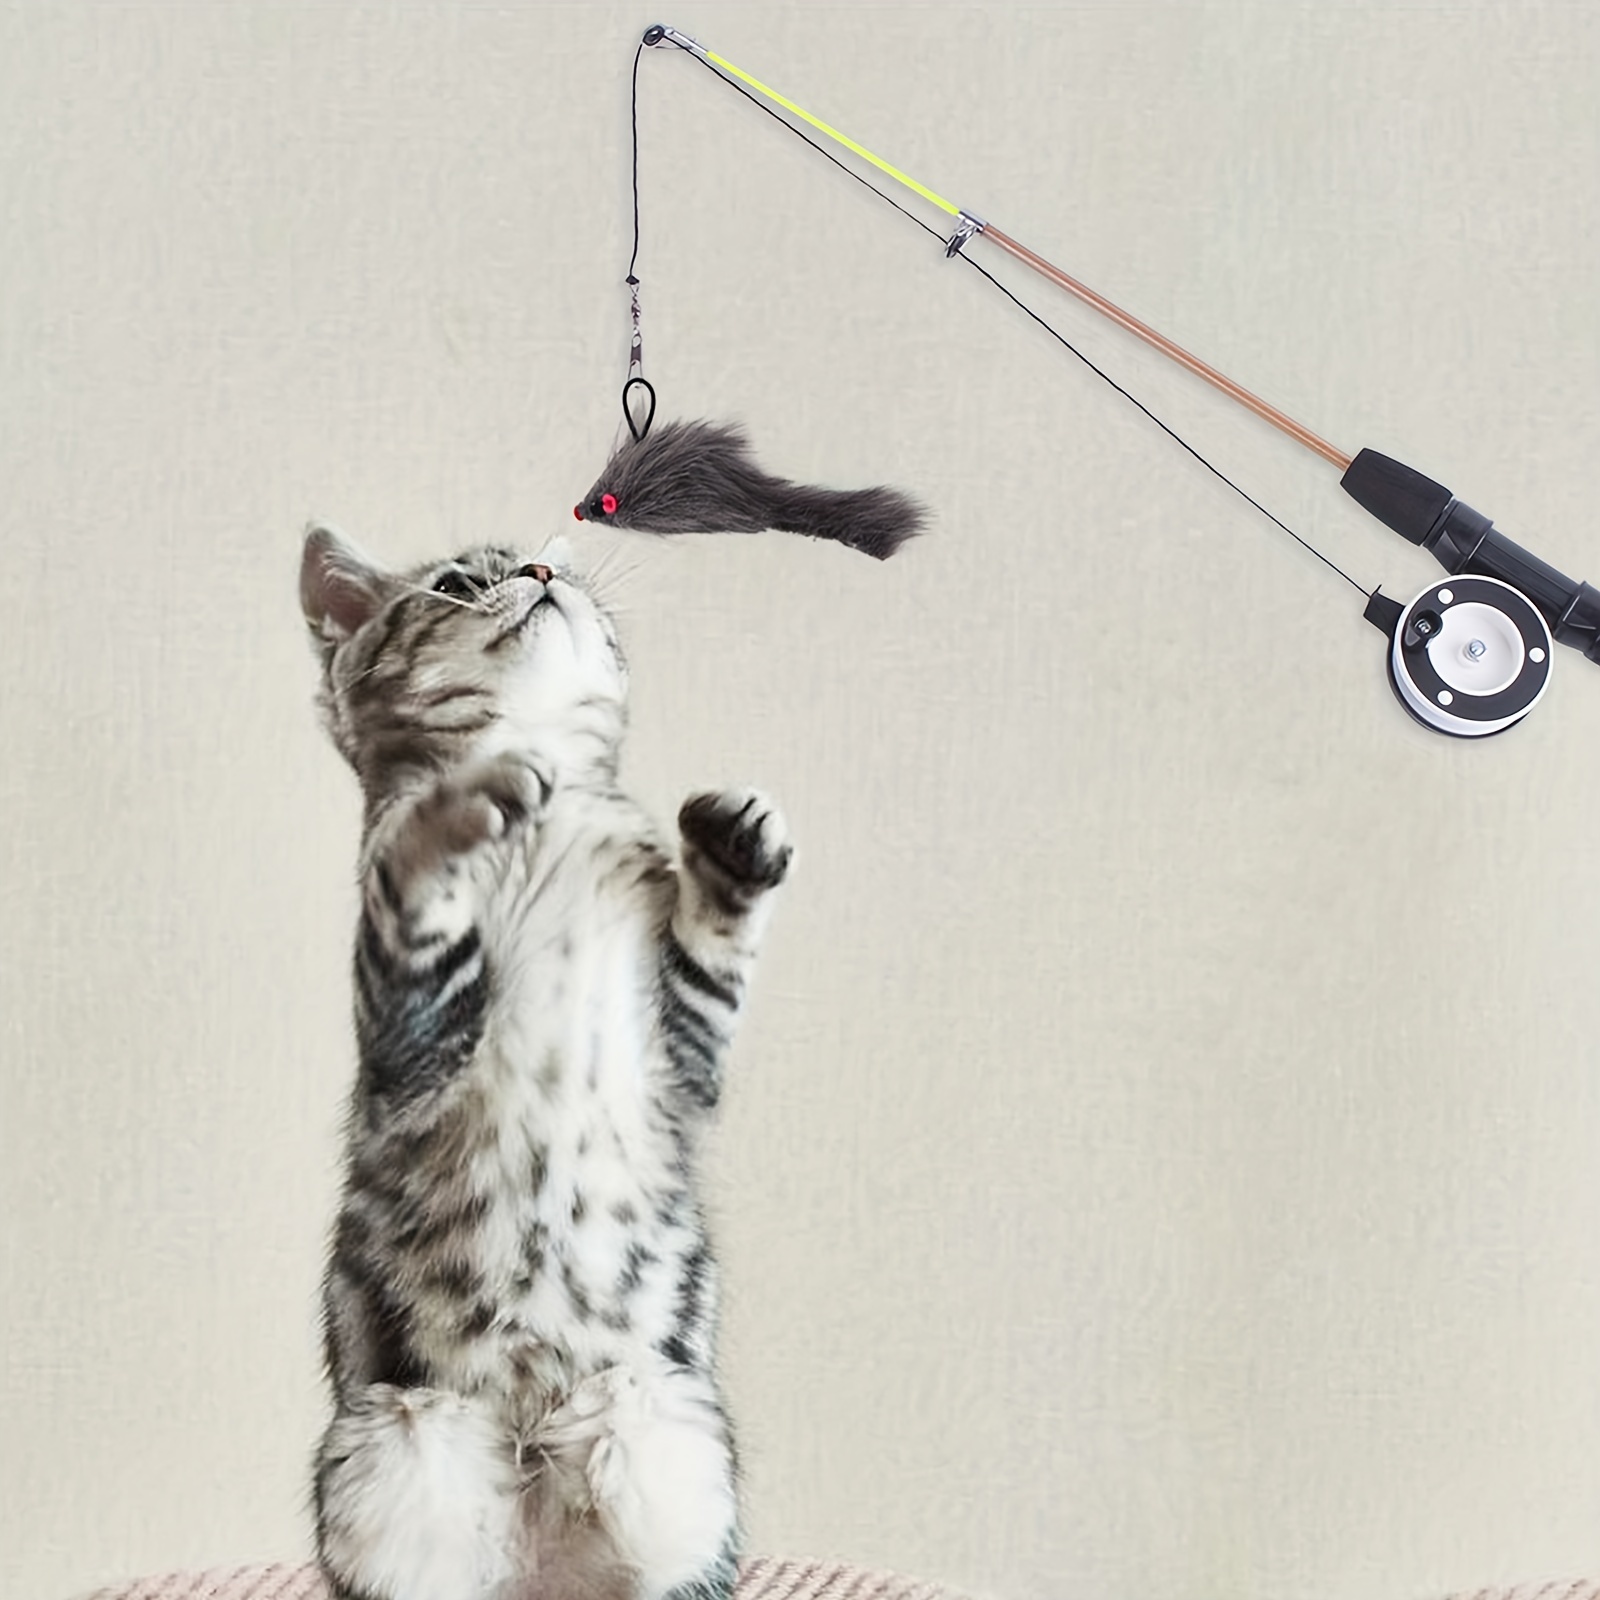 3Pcs cat toy fishing pole with reel fishing pole cat stick Toys